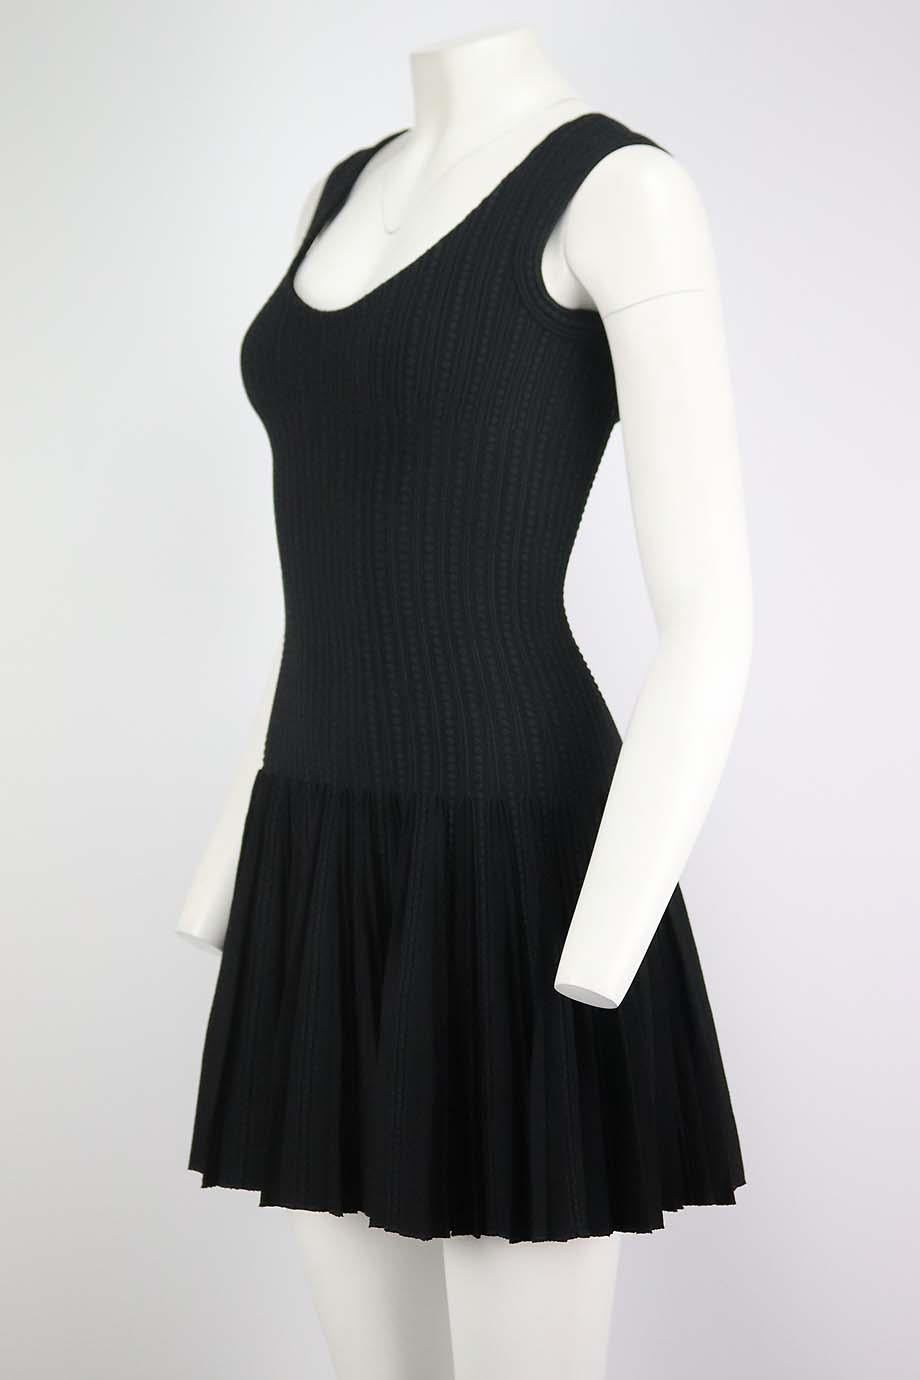 This mini dress by Azzedine Alaïa is designed in a figure-skimming skater silhouette, this sleeveless style is made from stretch-knit and trimmed with textured edge. Black viscose-blend. Zip fastening at back. 62% Viscose, 14% silk, 14% polyester,